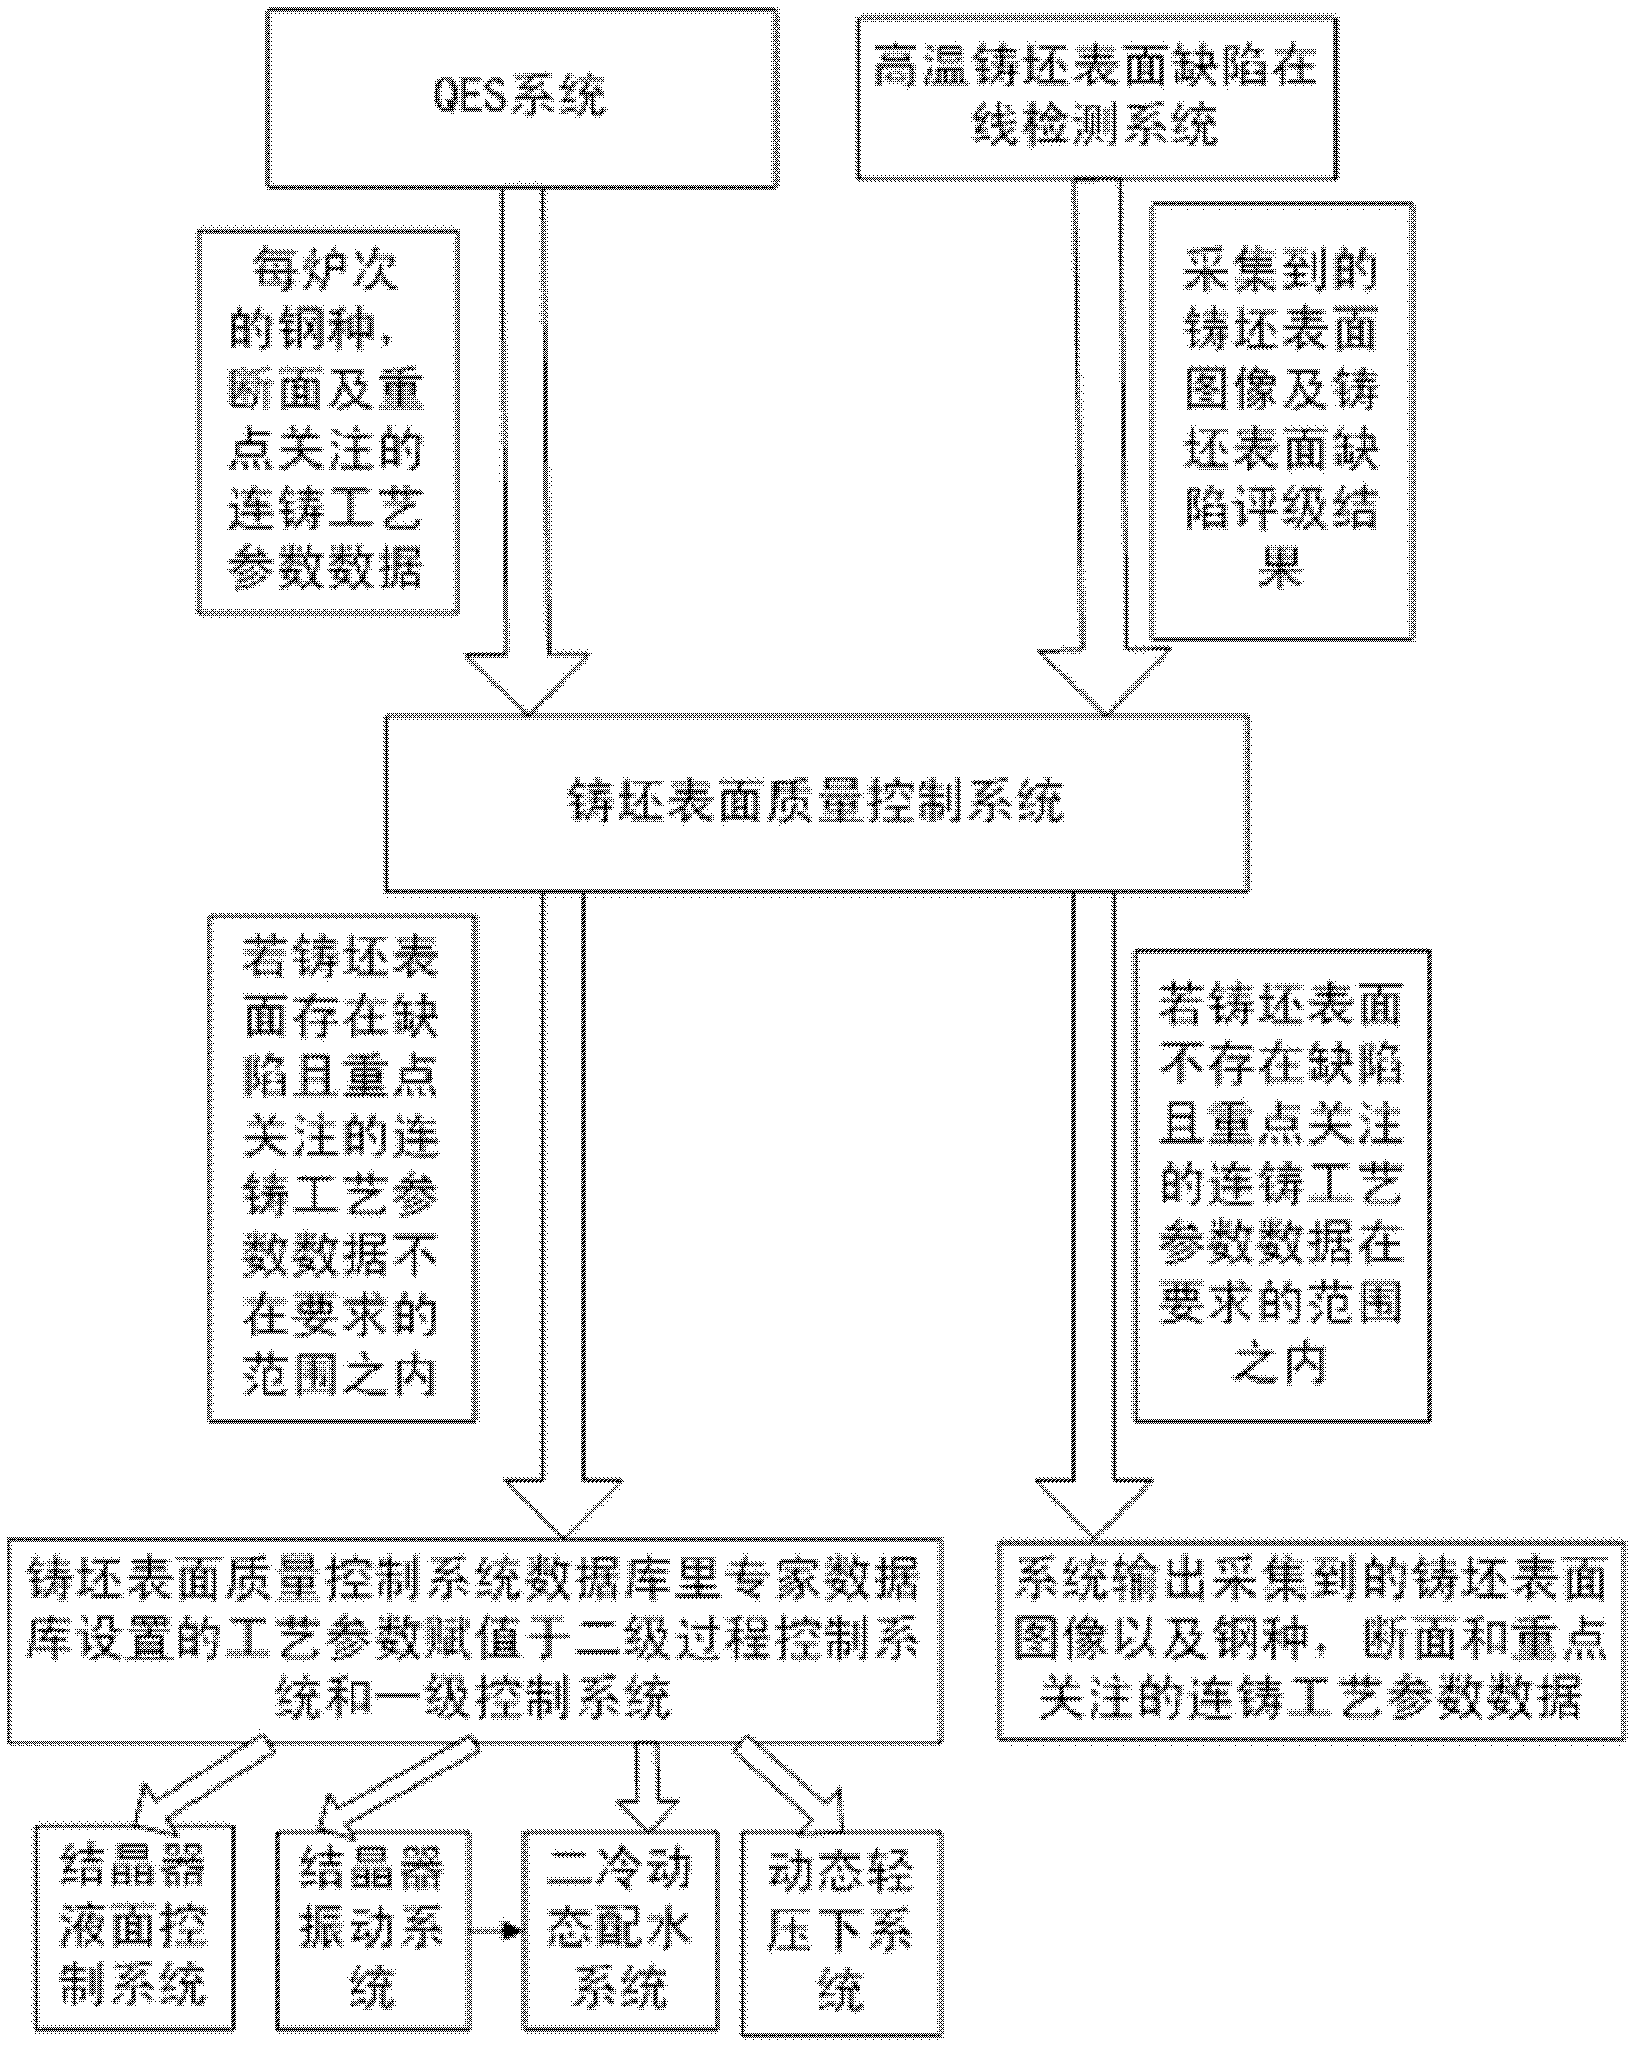 Online control system and control method for surface quality of continuous casting billet